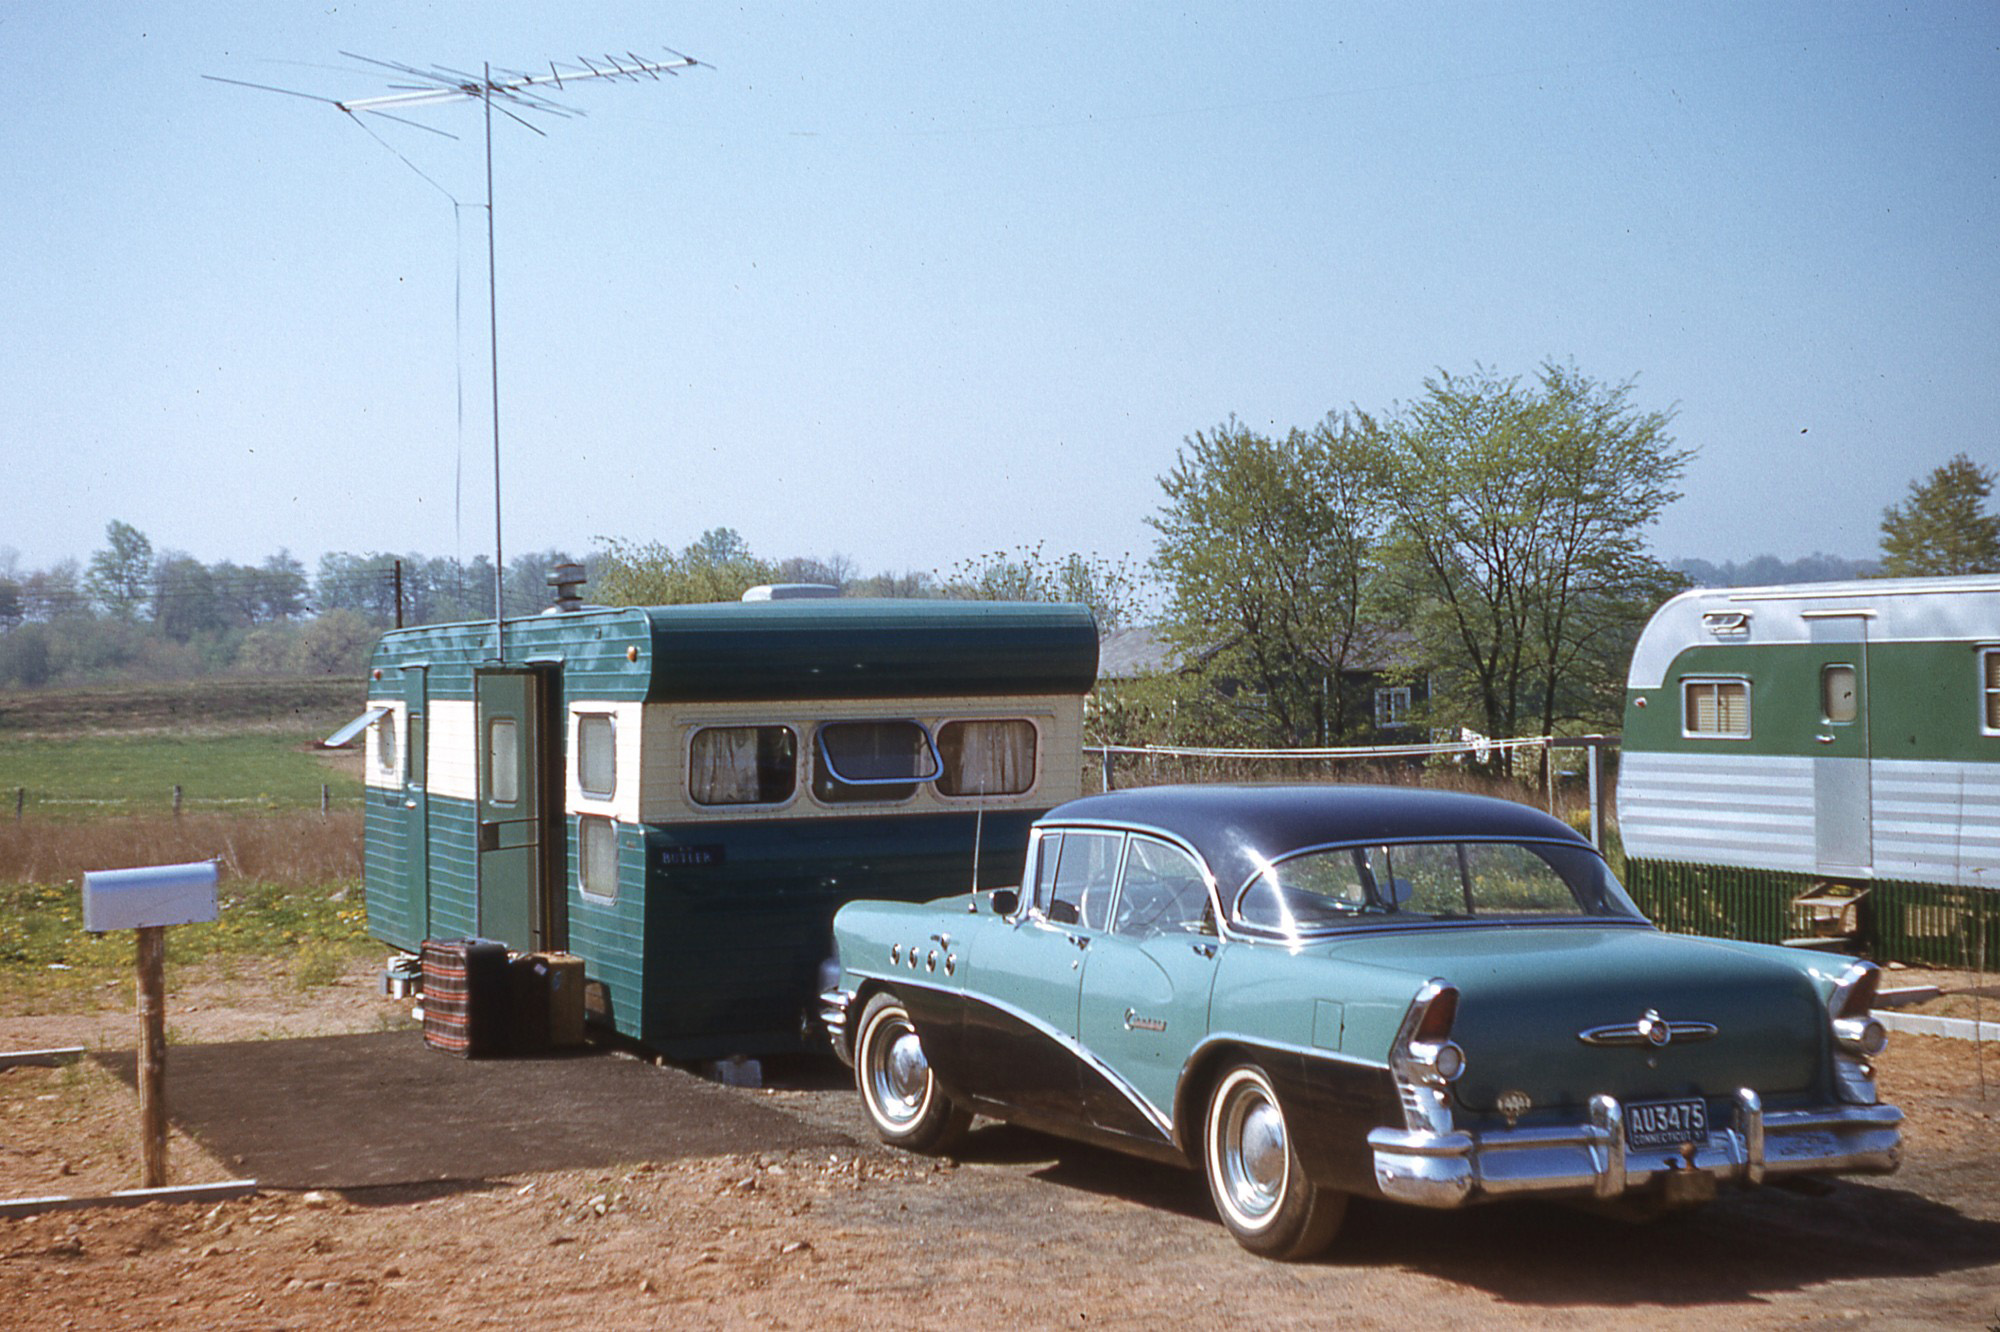 Edward and Gwen Butler, my grandparents, lived in this trailer in Connecticut. It's rather dwarfed by the massive '55 Buick and the 15-foot TV antenna. They had just returned from a trip to England, hence the luggage at the door. Photo by Edward Butler circa 1957 on a 35mm Kodachrome slide, scanned February 2021. View full size.